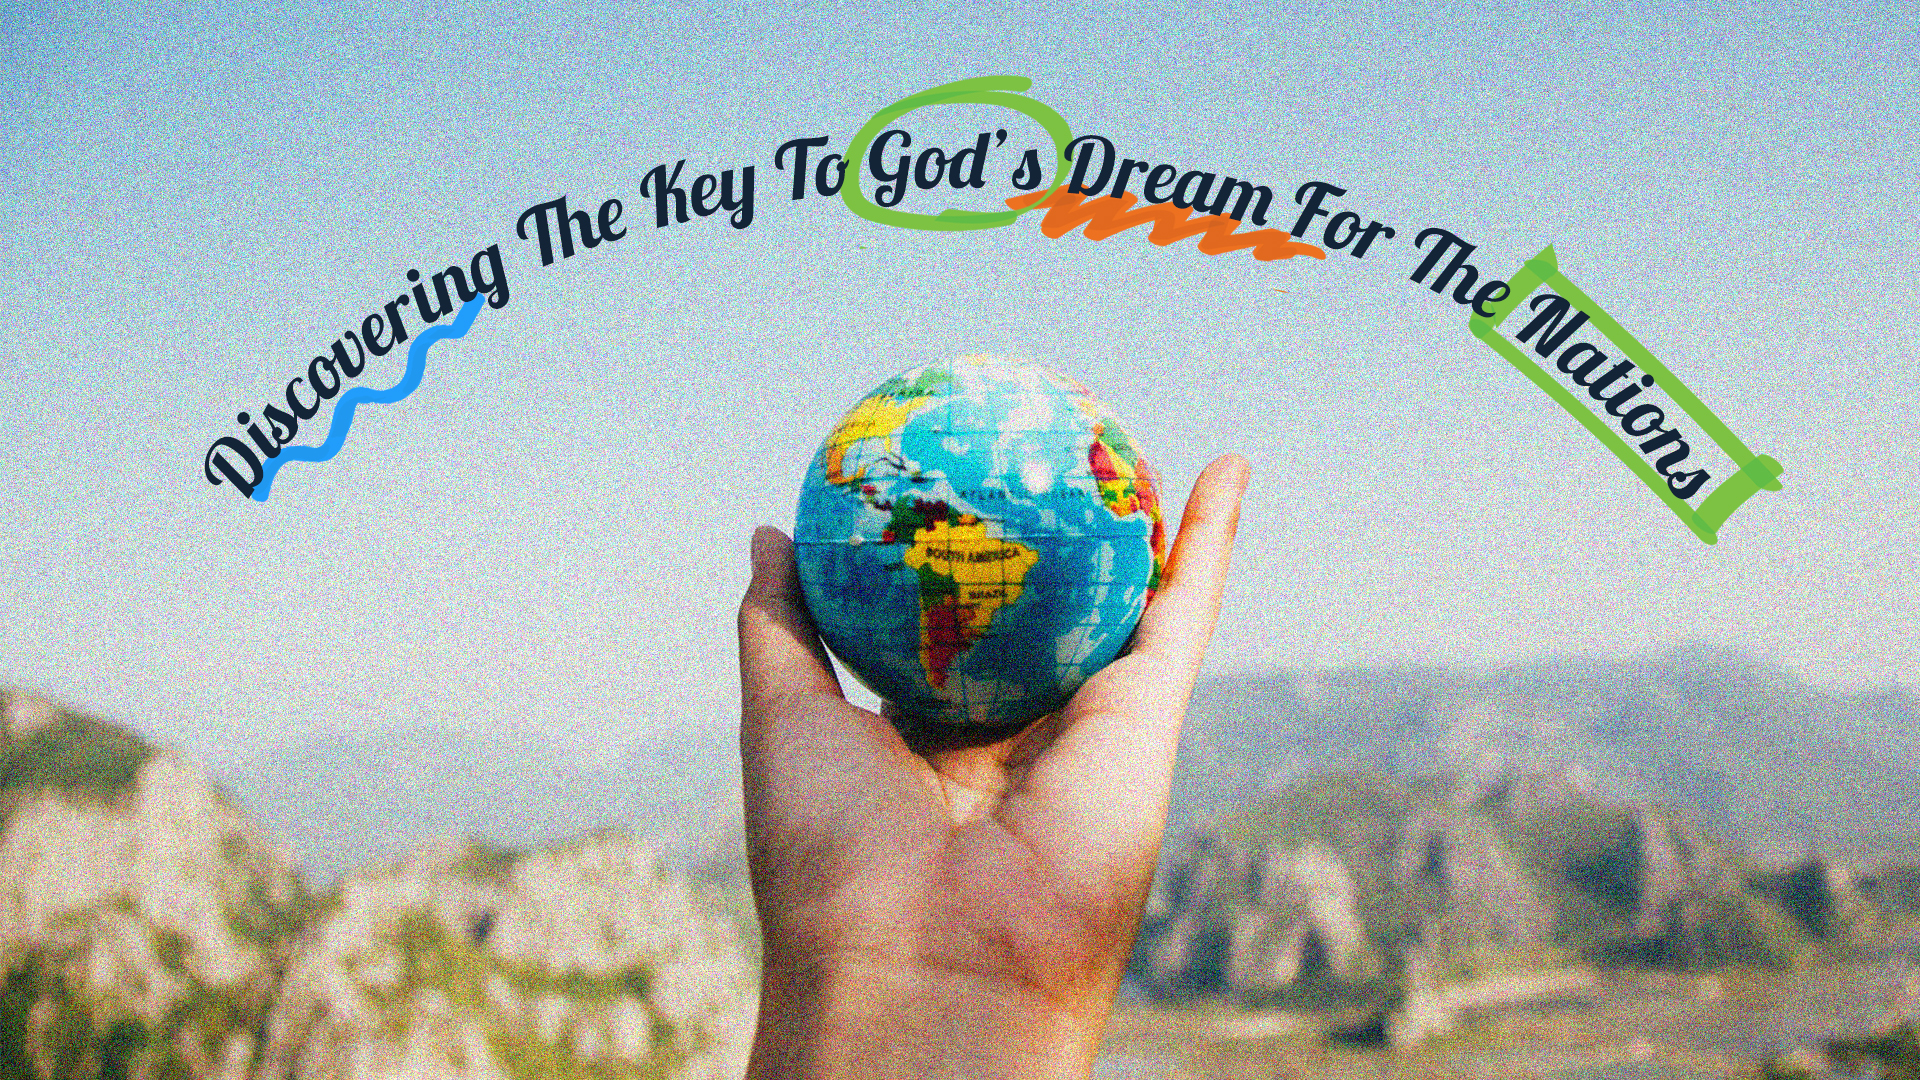 Discovering The Keys To God's Dream For The Nations